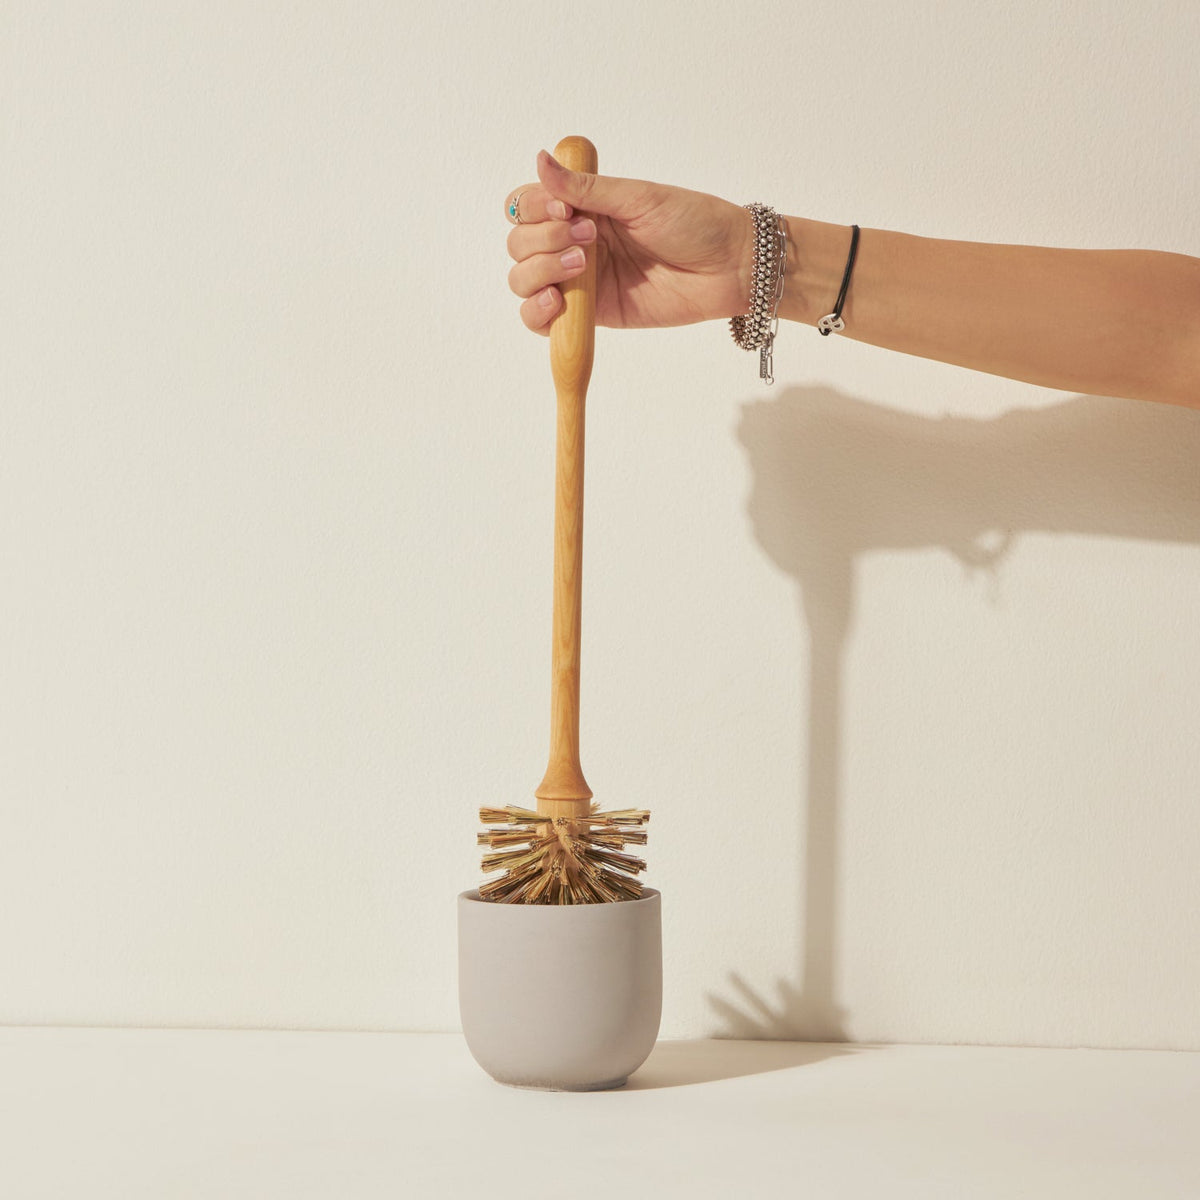 Birch Toilet Brush Refill - The Foundry Home Goods